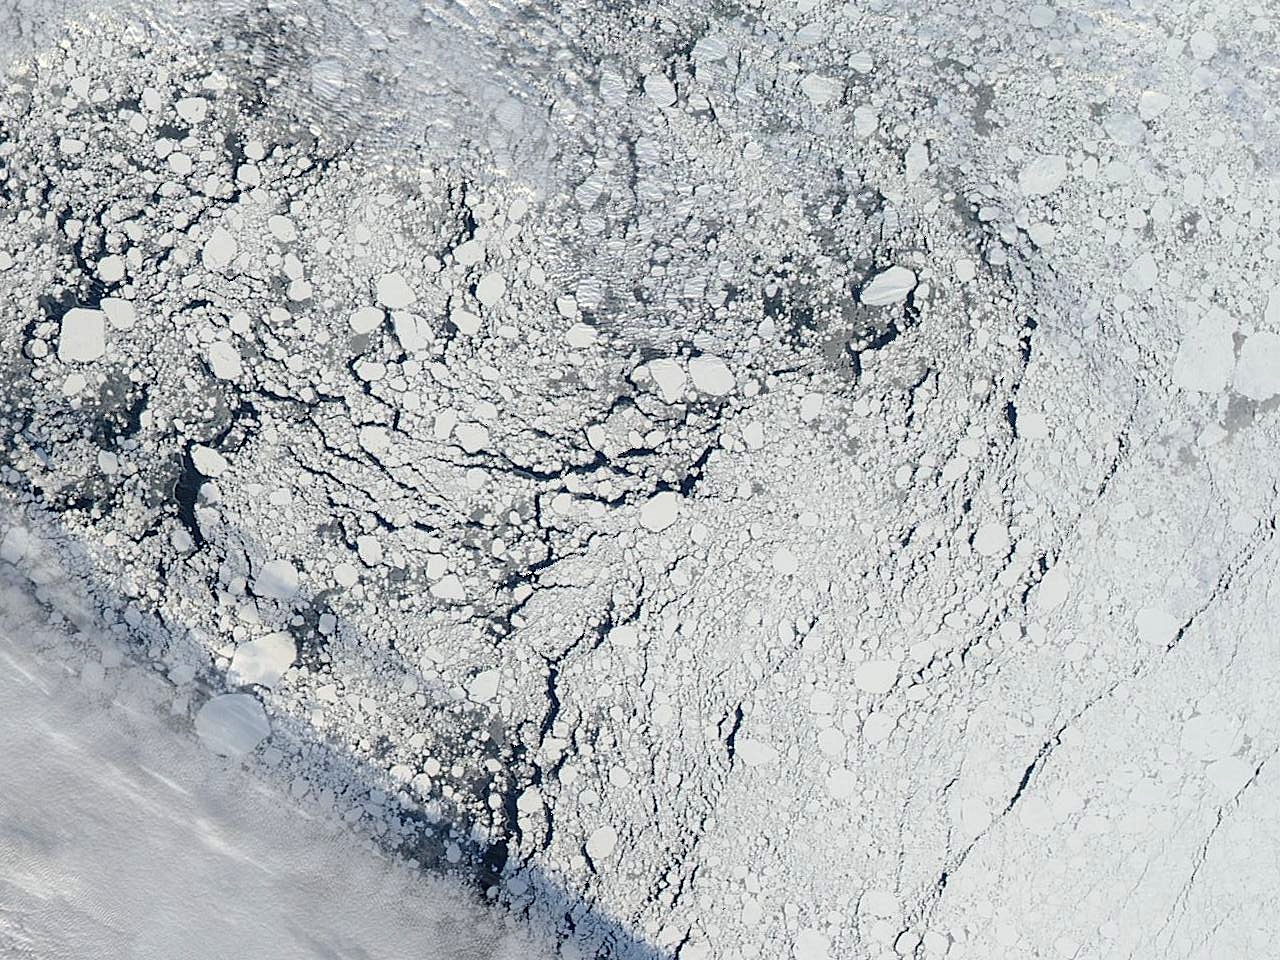 An image of an area of the Arctic sea ice pack well north of Alaska, captured by the MODIS instrument on NASA's Aqua satellite on Sept. 13, 2013. A cloud front can be seen in the lower left, and dark areas indicate regions of open water between sea ice formations. <i><b>Image Credit: Image courtesy NASA Worldview</b></i>